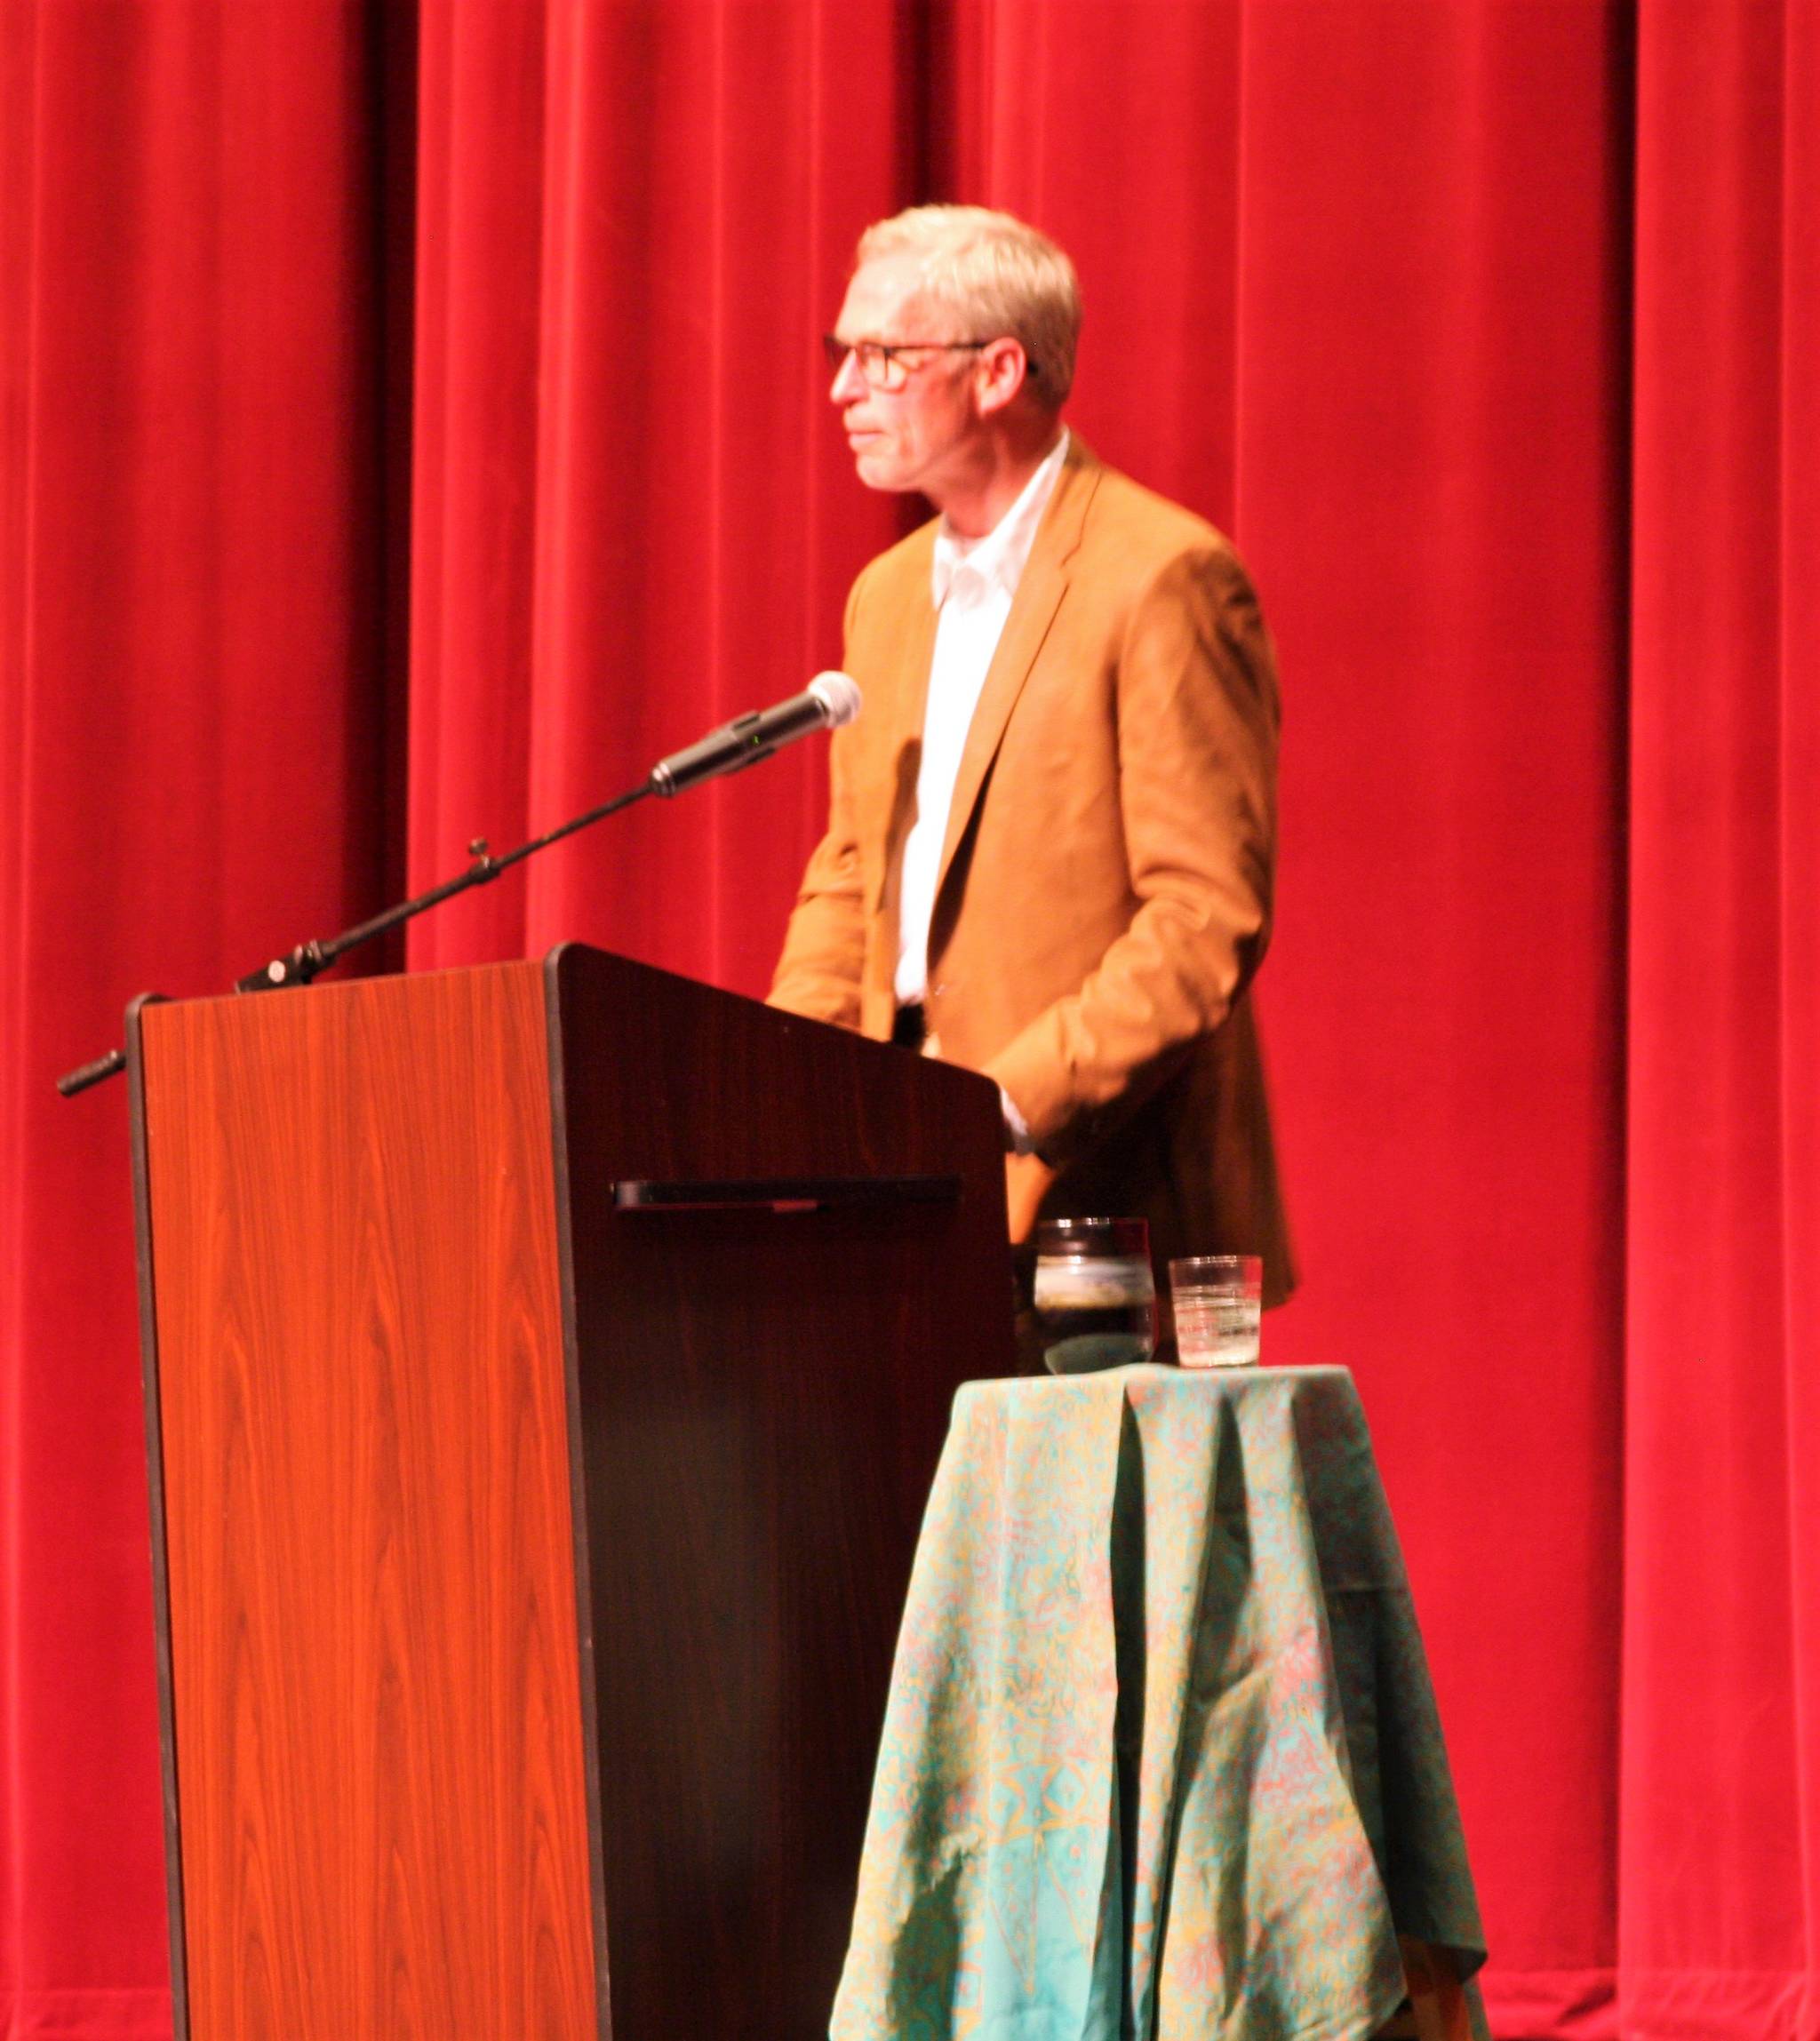 University of Alaska President Jim Johnsen introduces the 2018 Kachemak Bay Writers’ Conference keynote speaker Anthony Doerr before his public reading on Saturday, June 9, 2018 at the Homer High School Mariner Theatre in Homer, Alaska. (Photo by Delcenia Cosman)